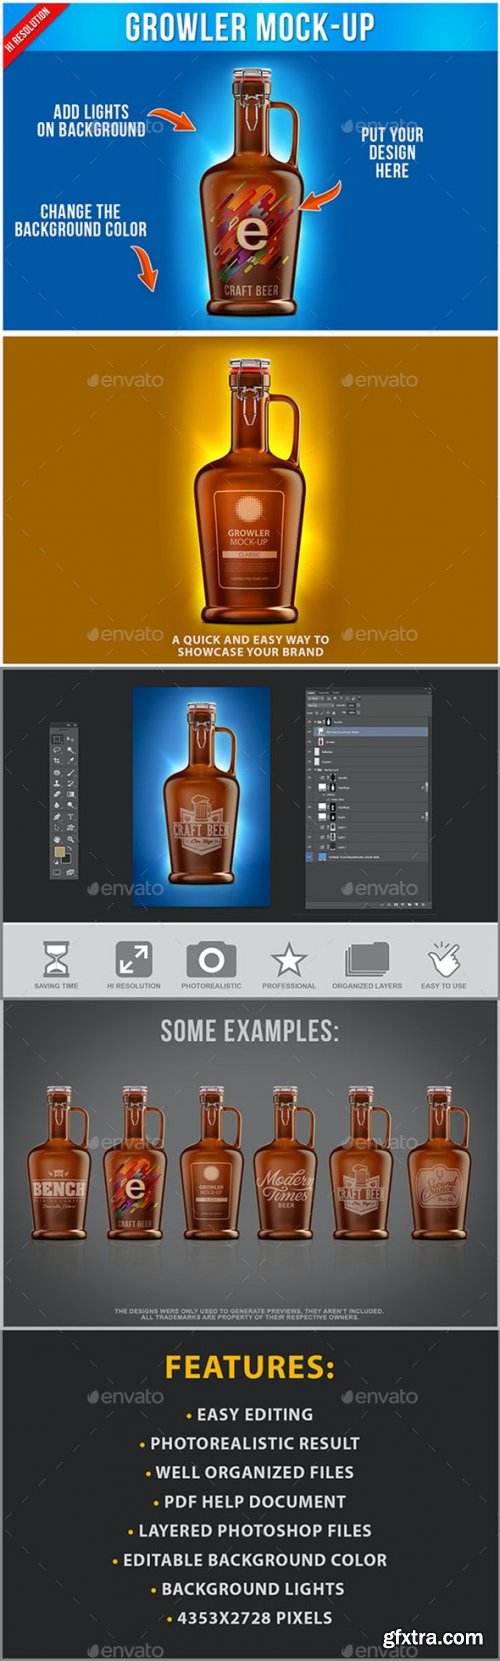 GraphicRiver - Growler Mock-up 22096541